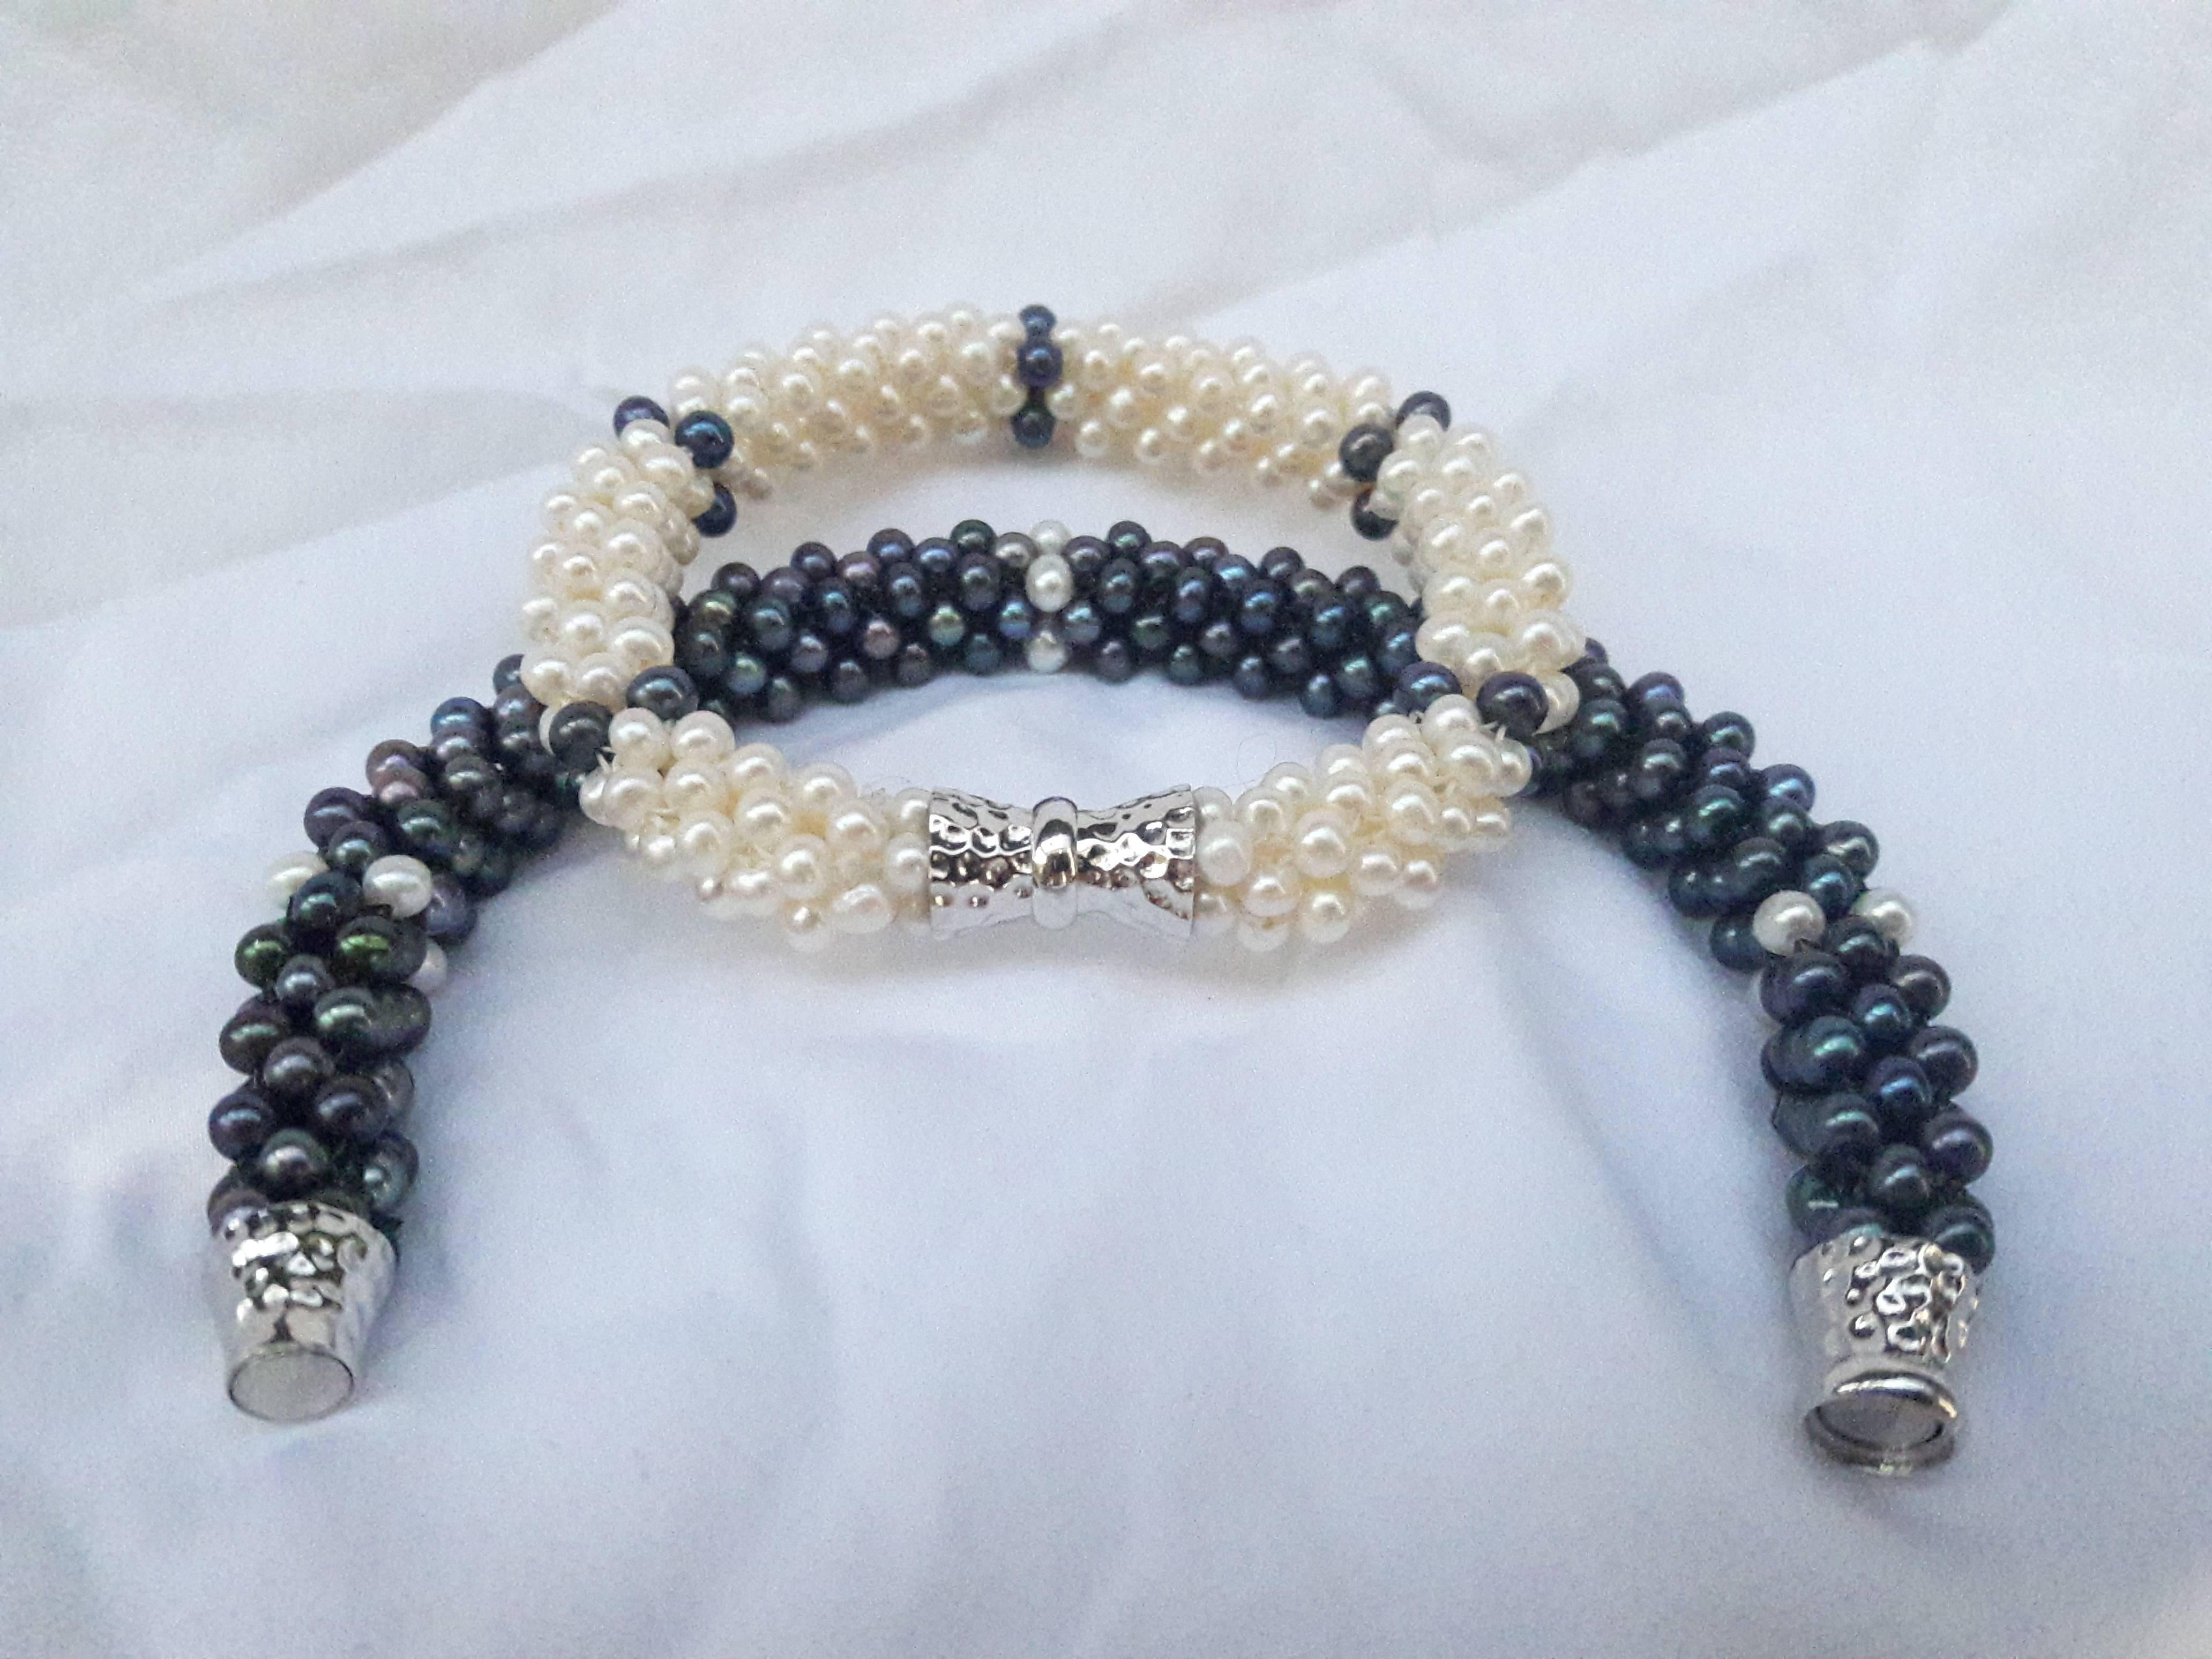 Woven Black and White Pearl Rope Necklace with Silver Magnetic Clasp 1